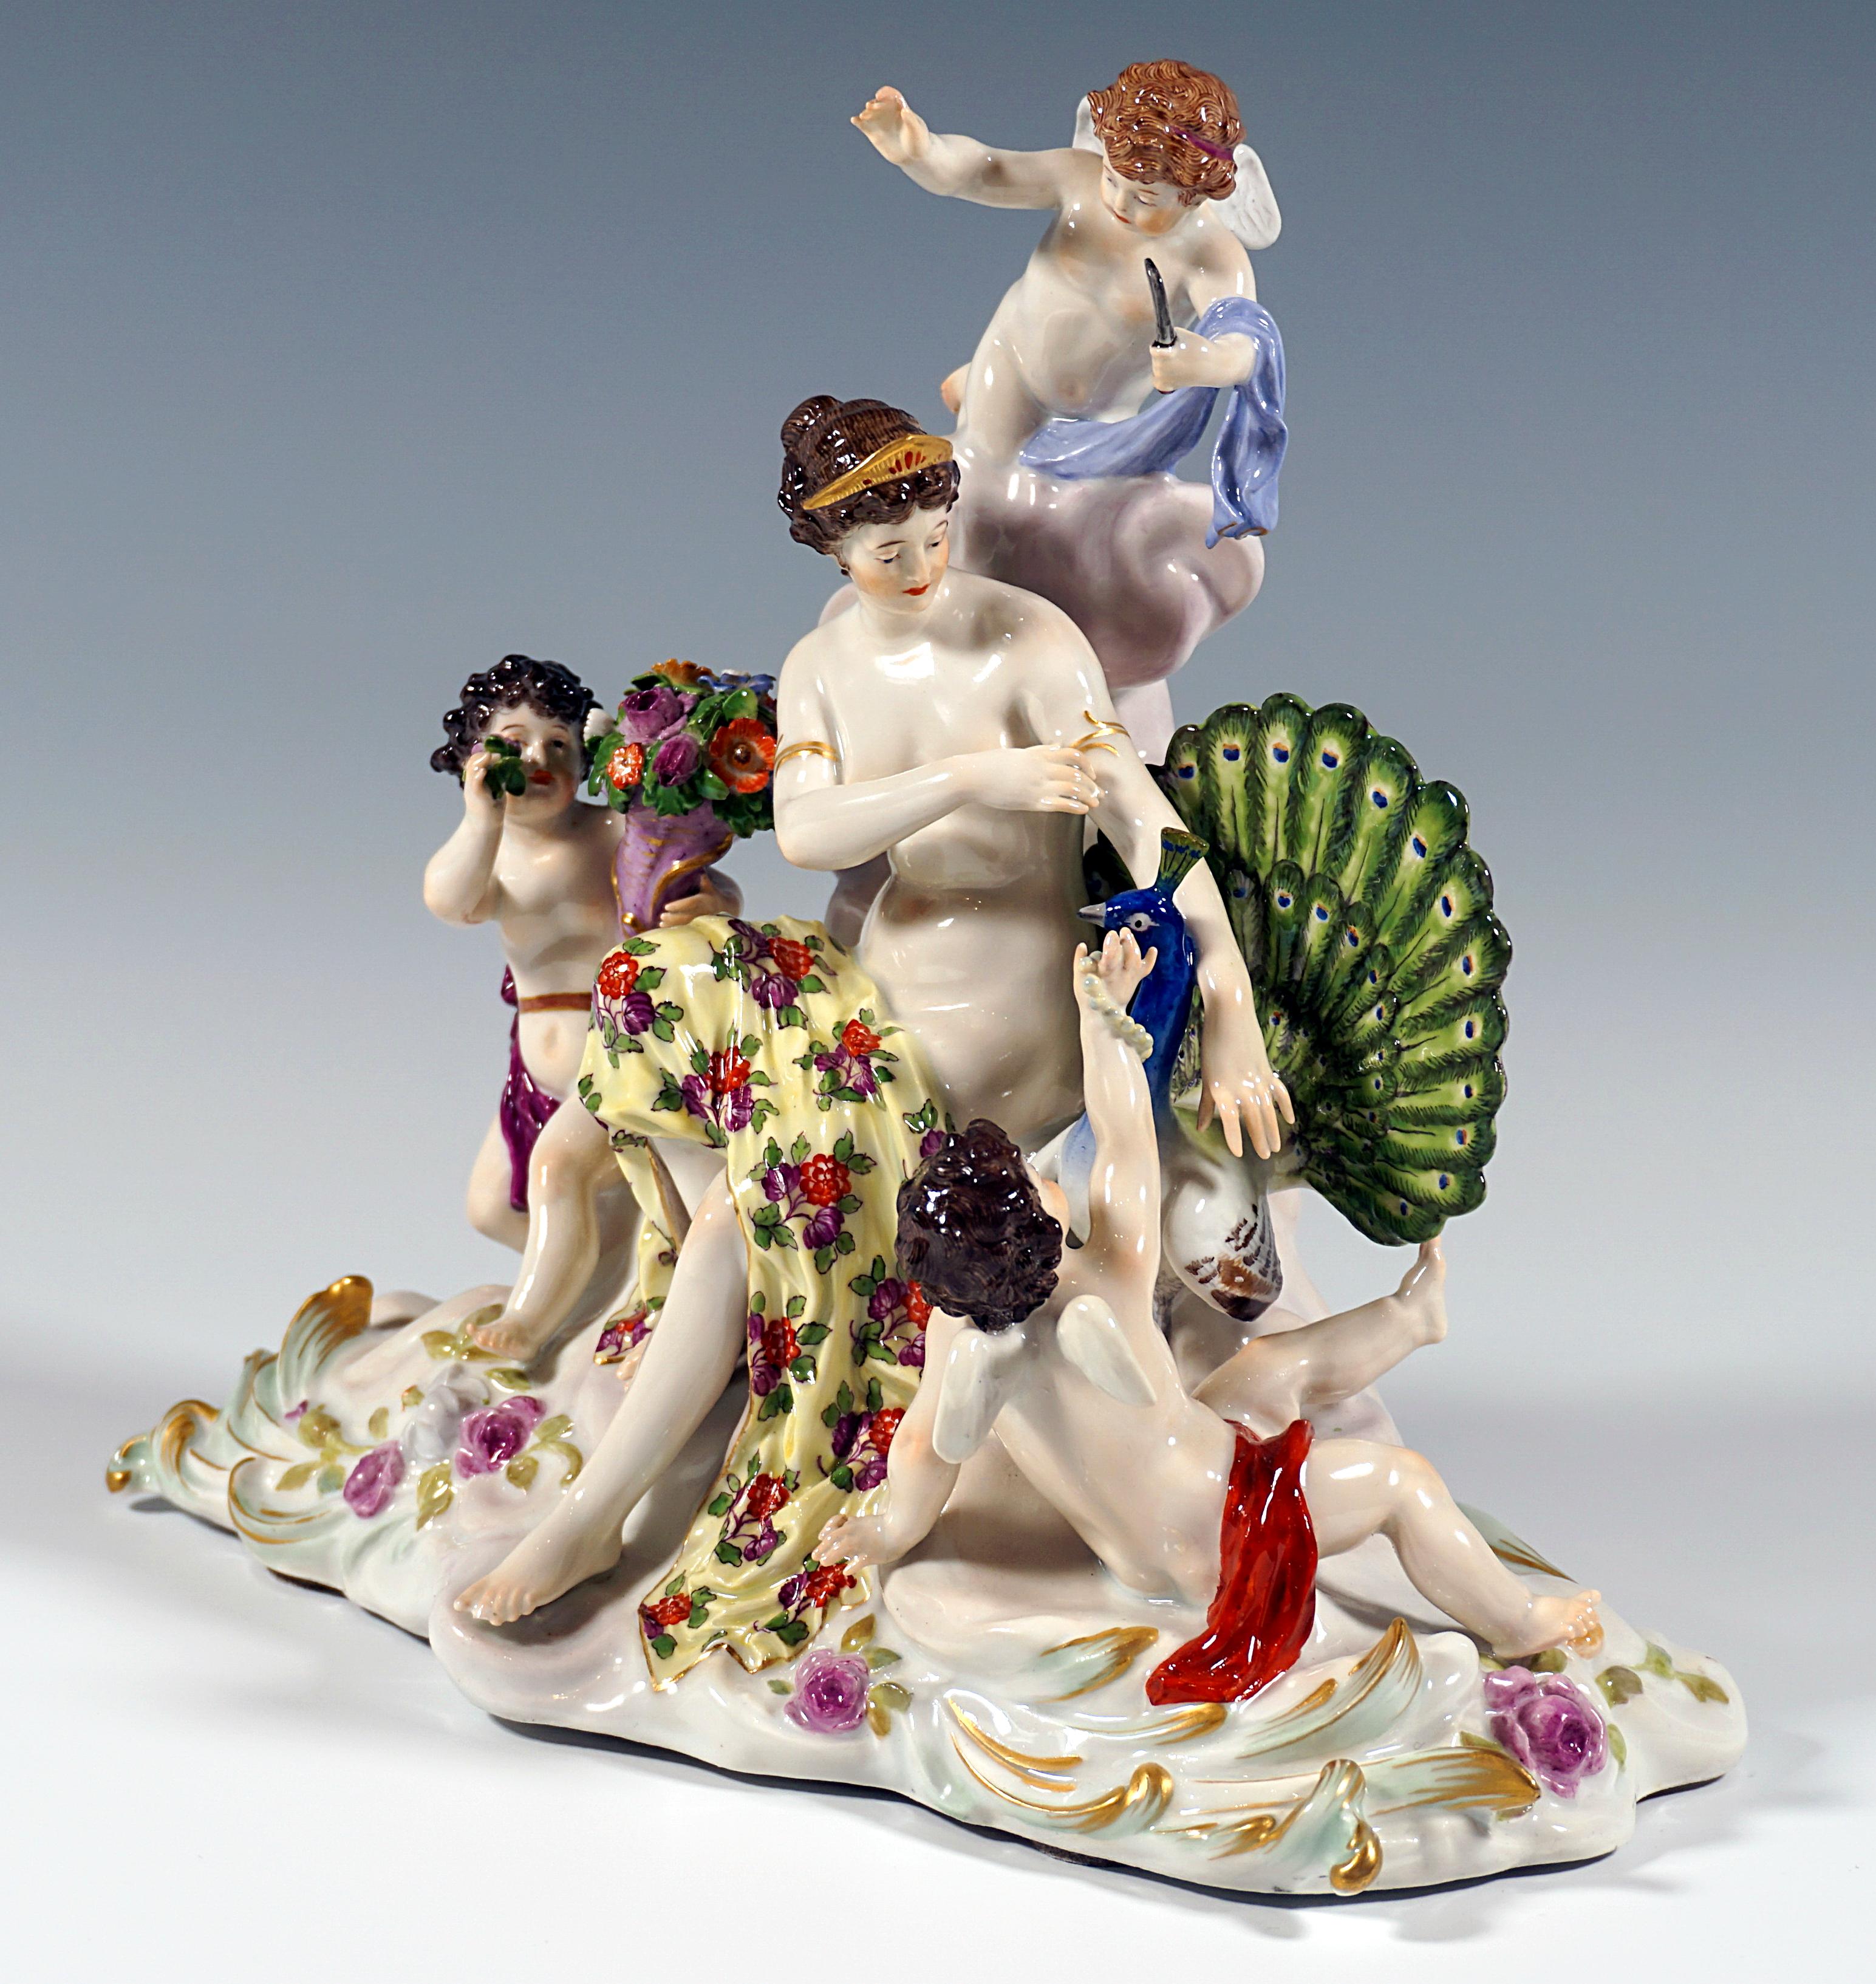 Very rare and excellent Meissen porcelain group around 1900:
Juno, the Roman goddess of the air (Greek Hera), as a young woman with her hair pinned up, covered only with a cloth, sitting on a cloud, adorning herself with bracelets, next to her